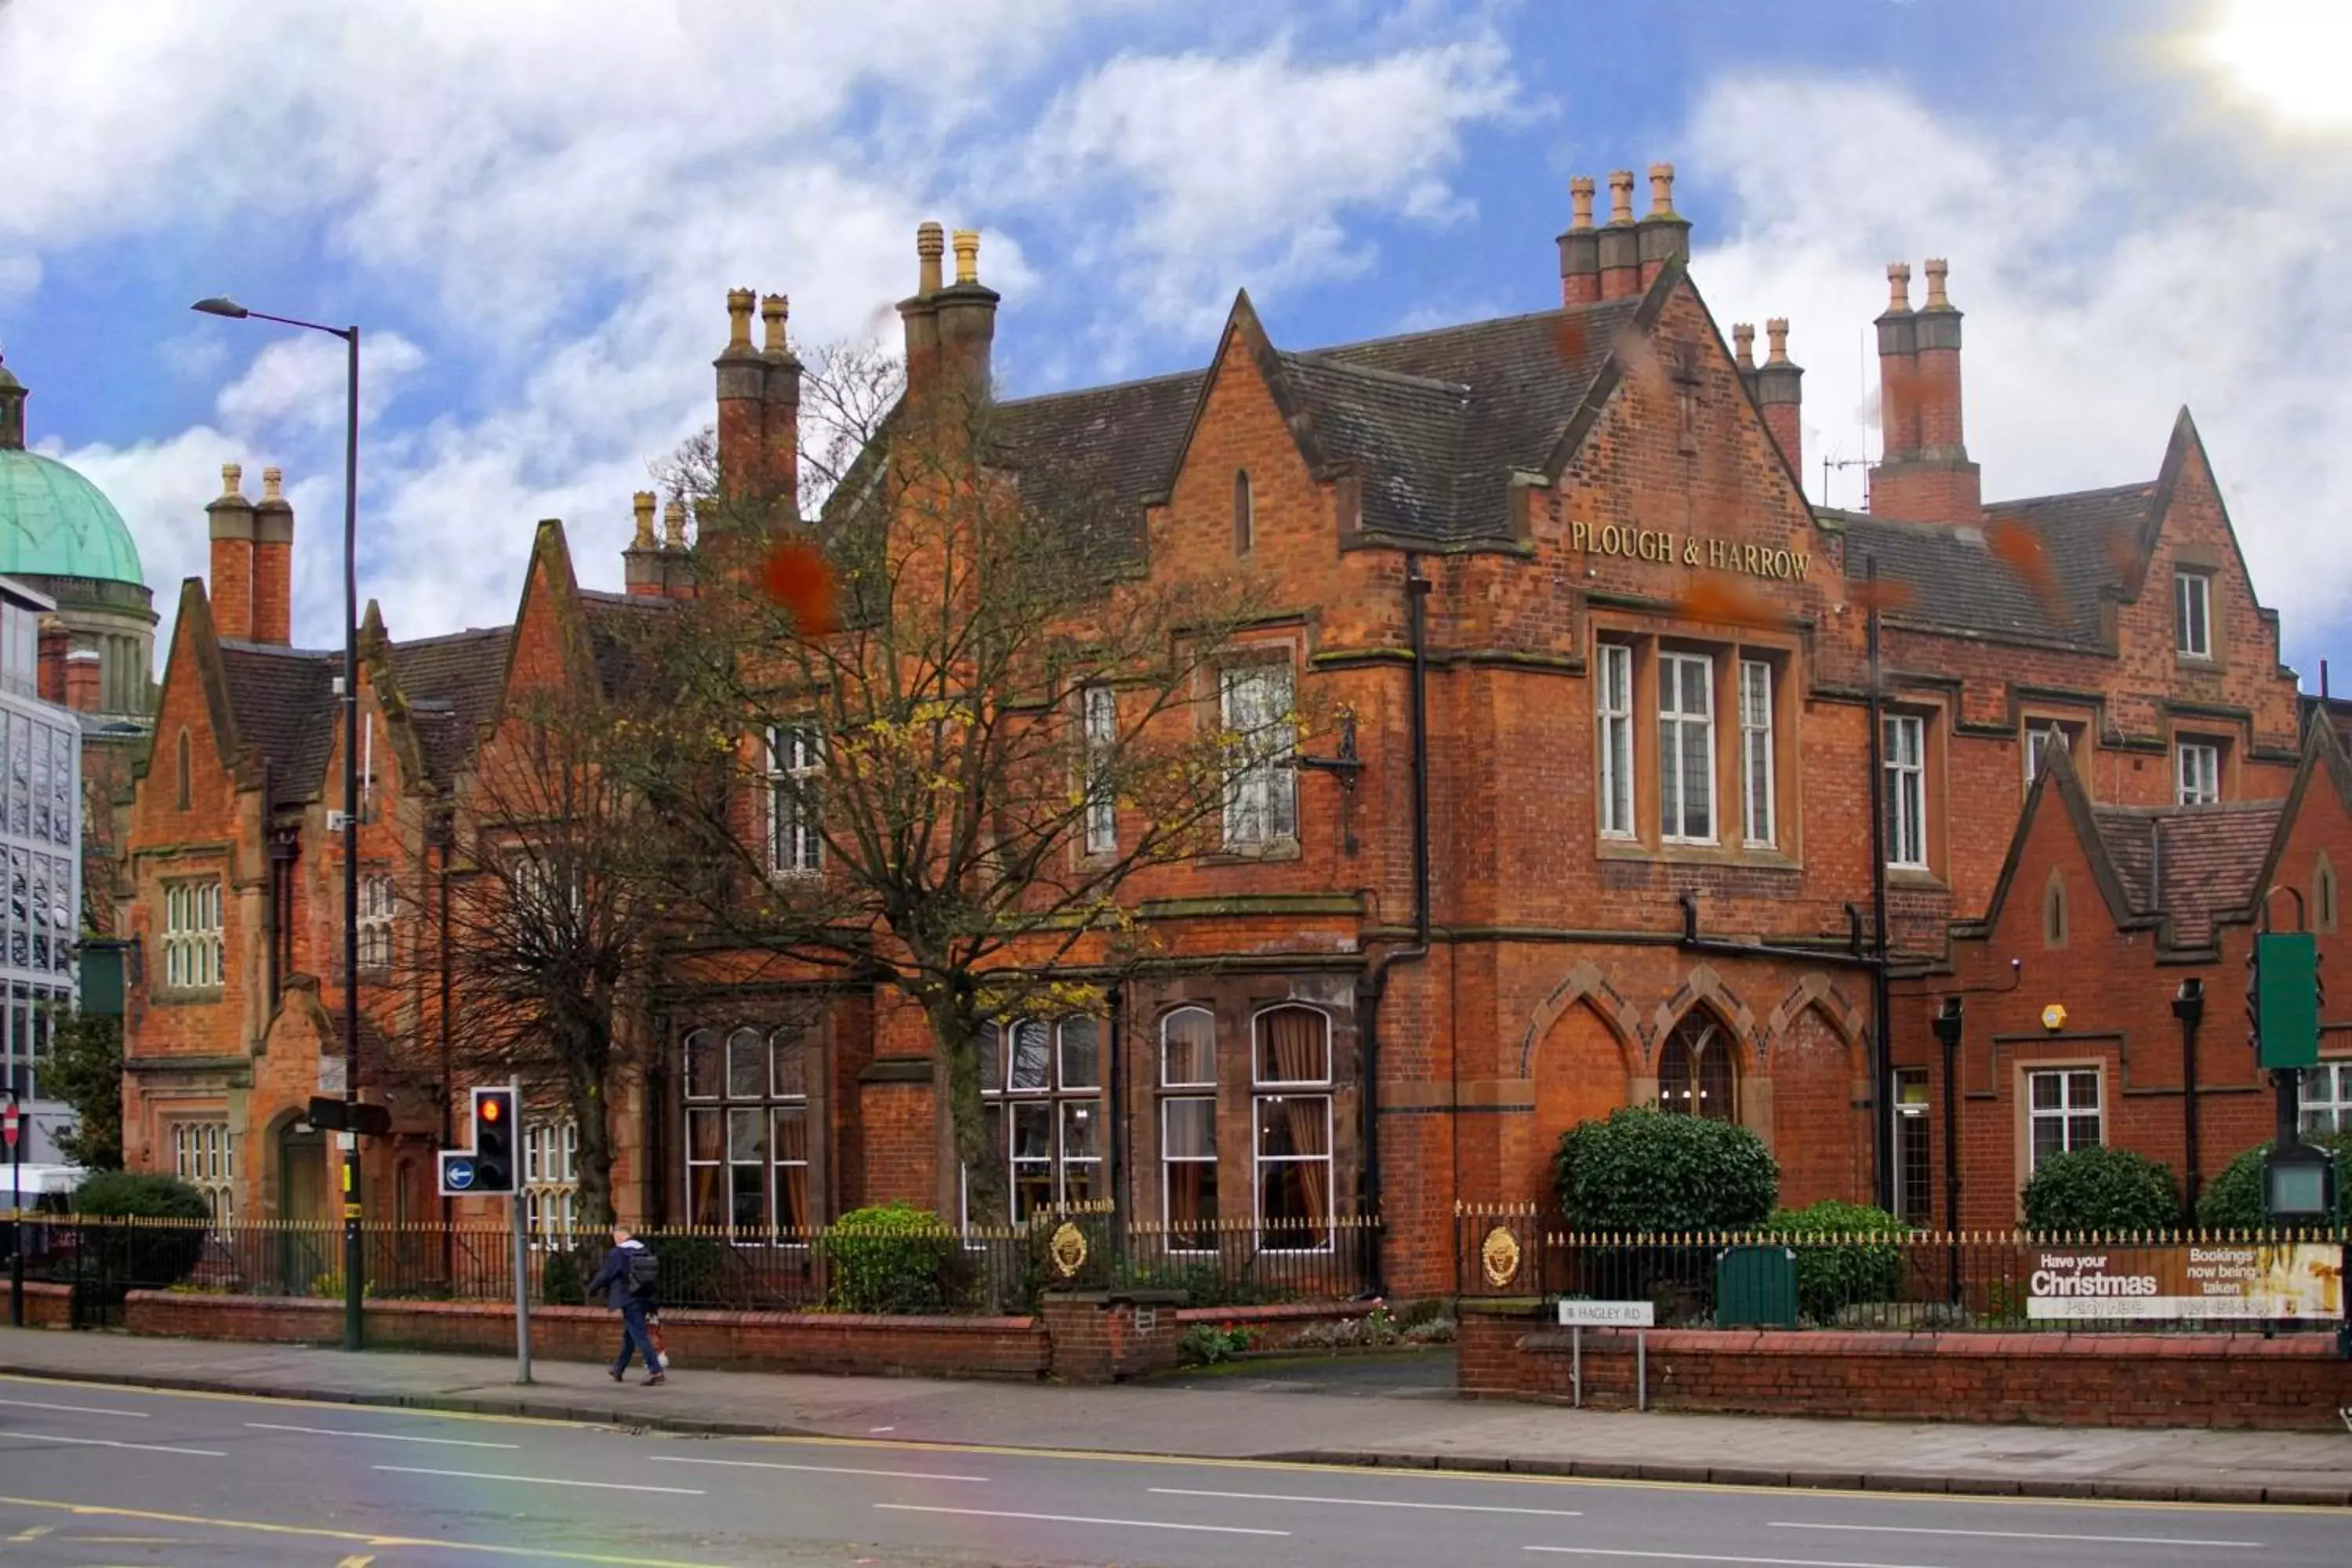 Property Building in Best Western Plough and Harrow Hotel